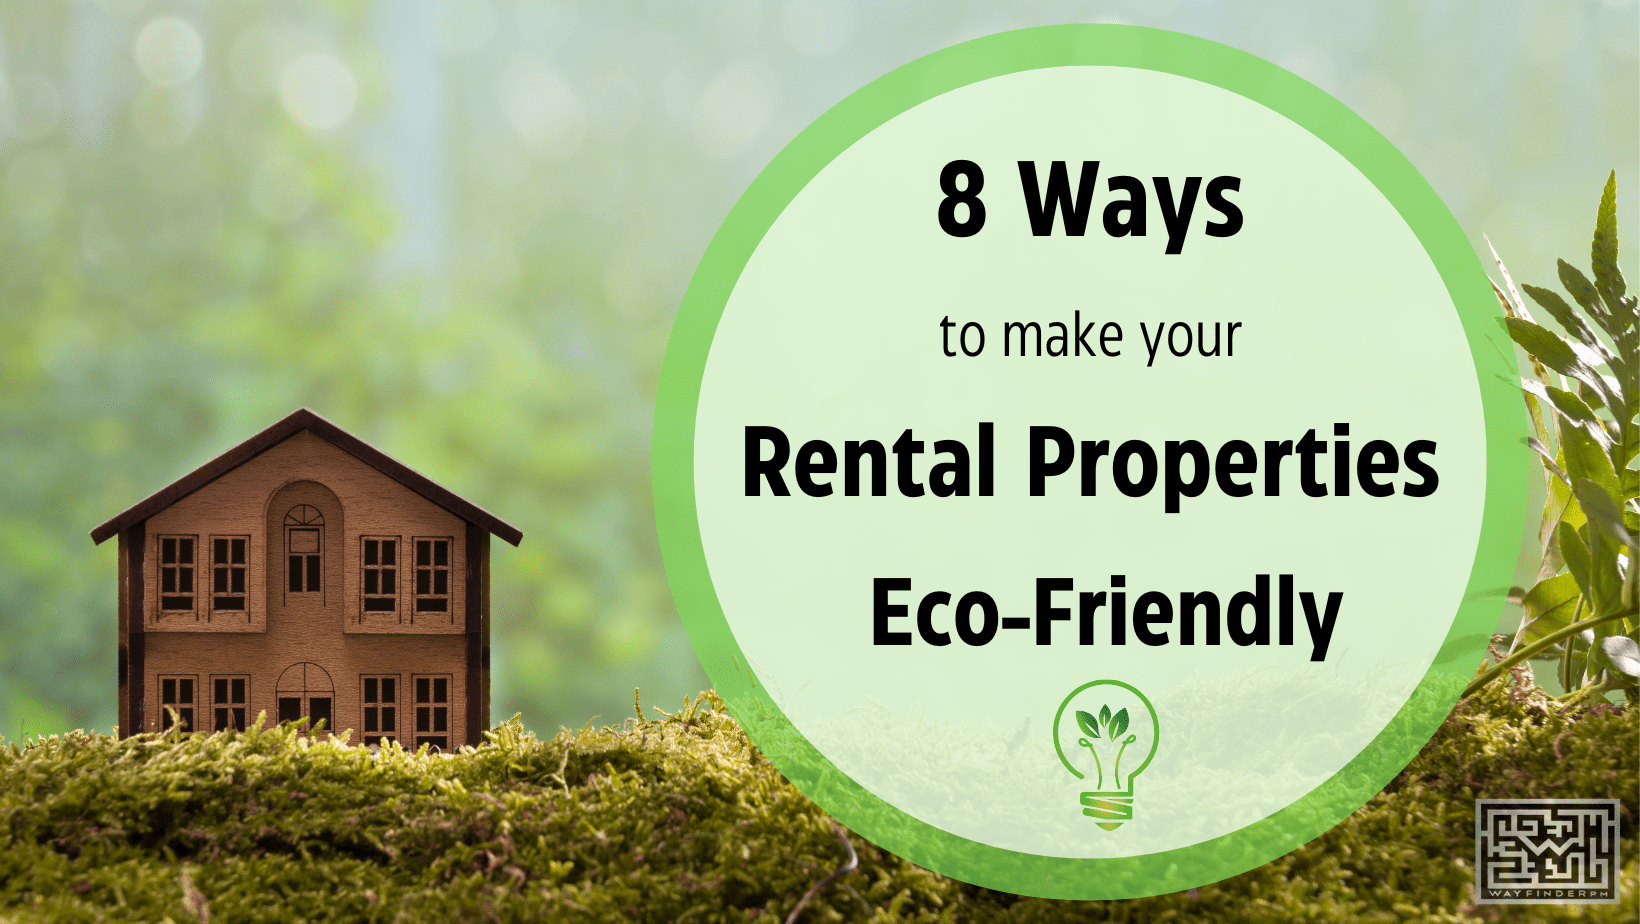 8 Ways to Make Your Rental Properties Eco-Friendly